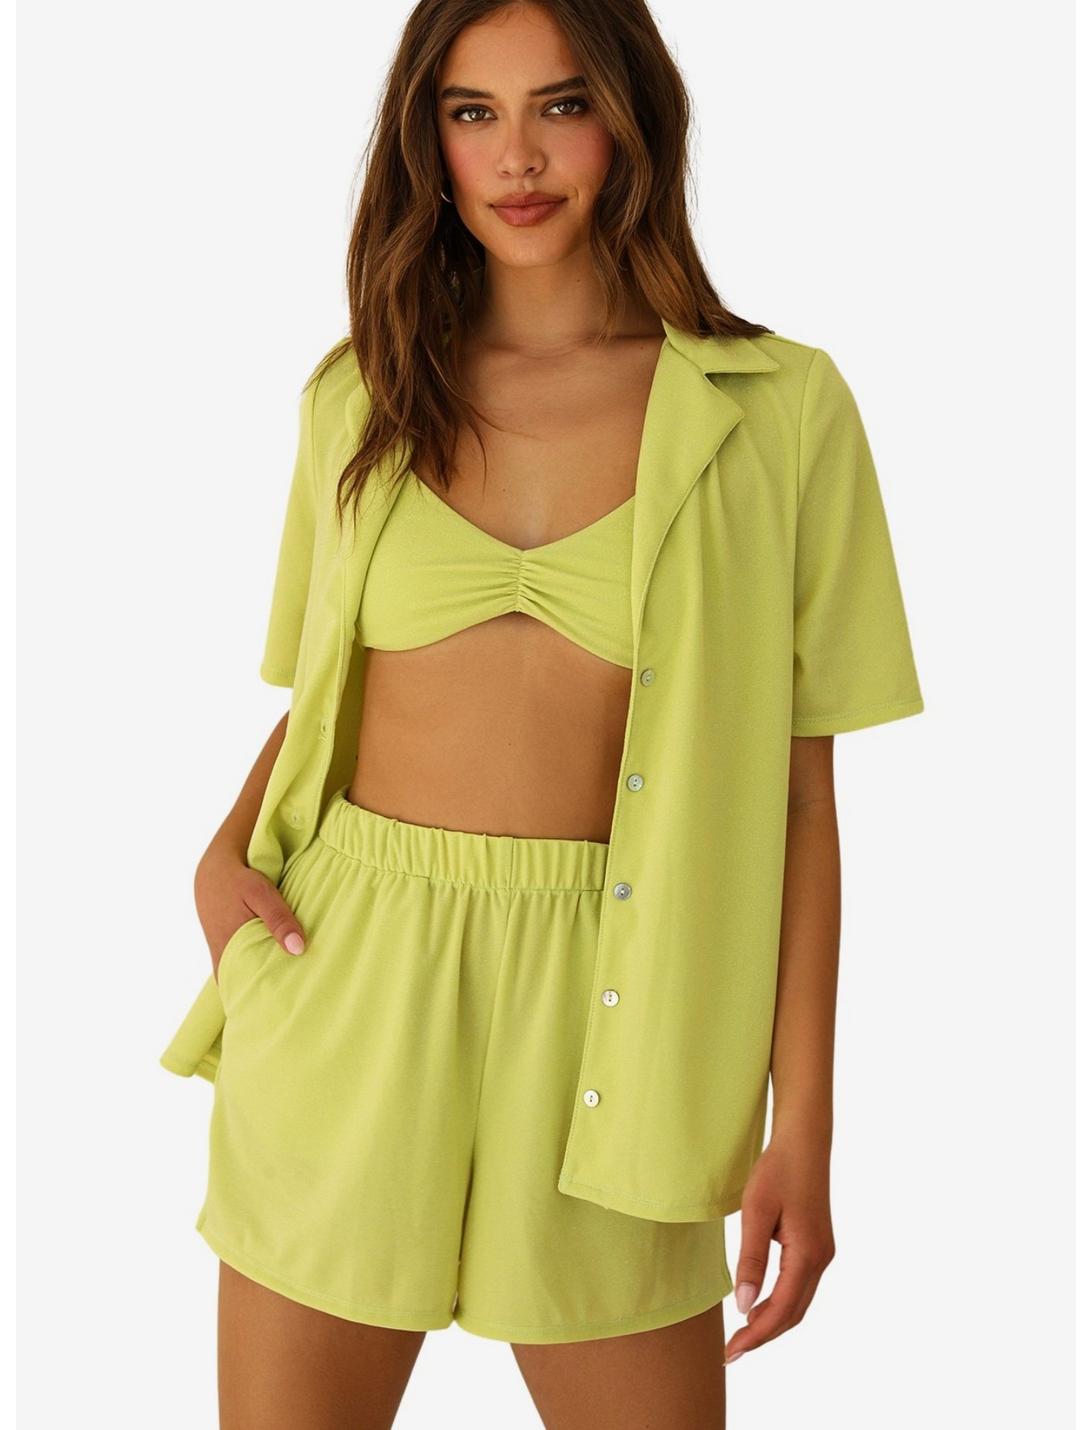 Dippin' Daisy's Mary-Kate Swim Top Cover-Up Lime Green, GREEN, hi-res